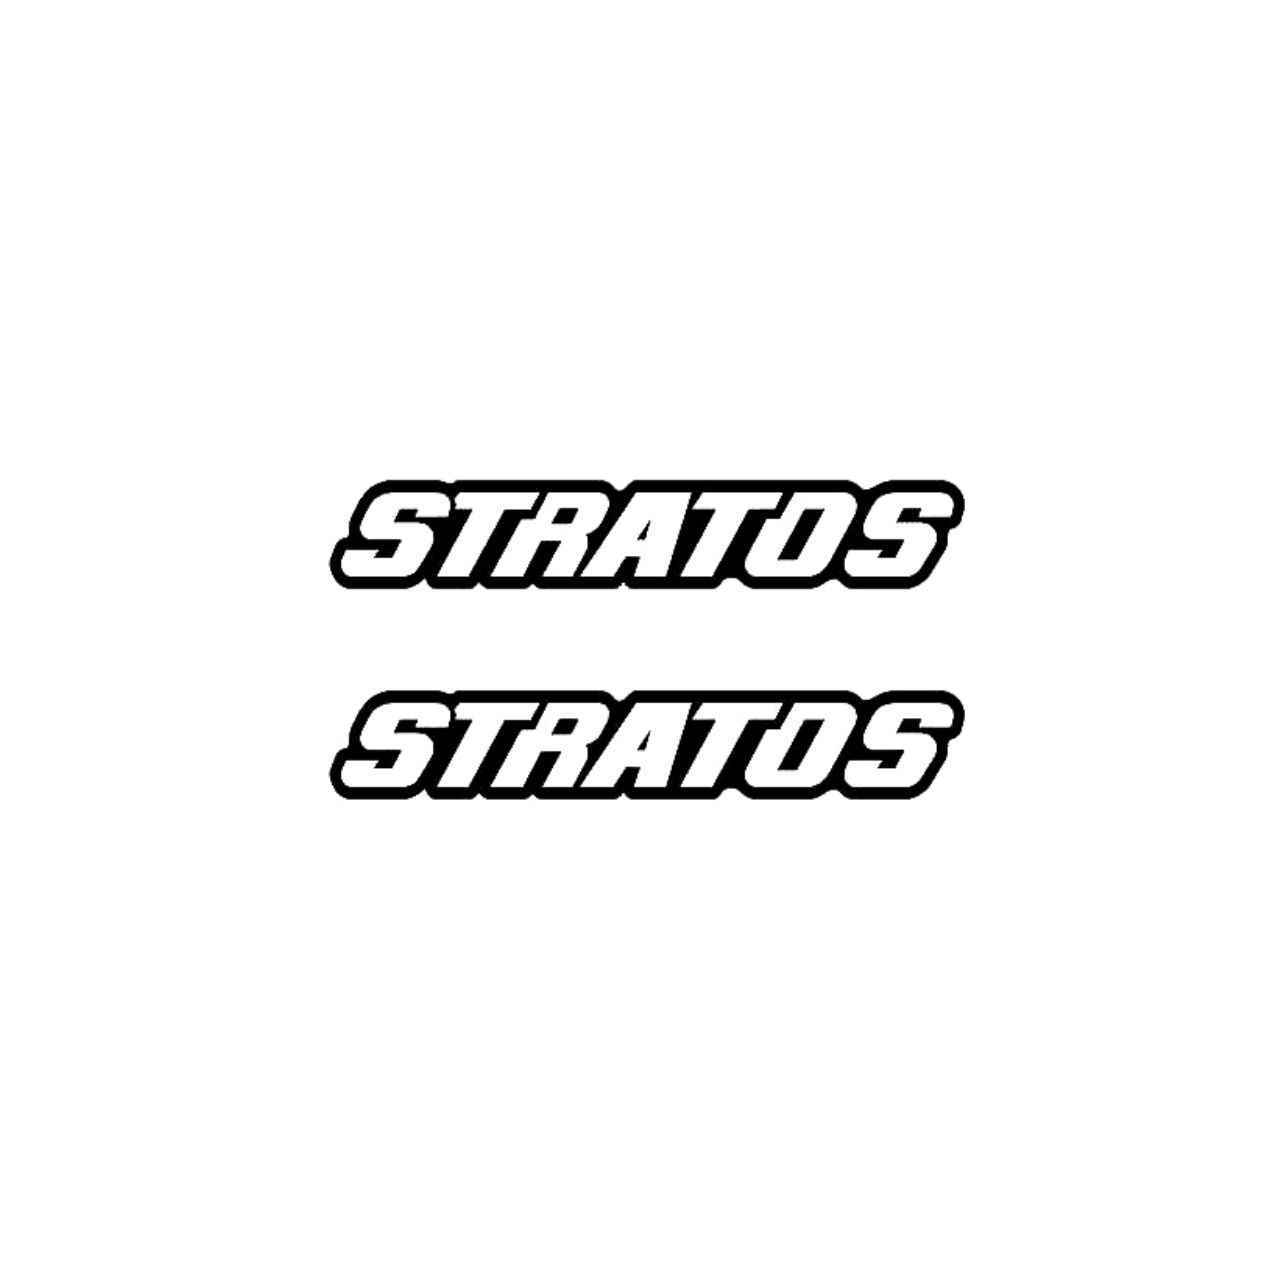 Stratos Logo - Stratos 278 Bass Mid 1990s Style Boat Kit Decal Sticker